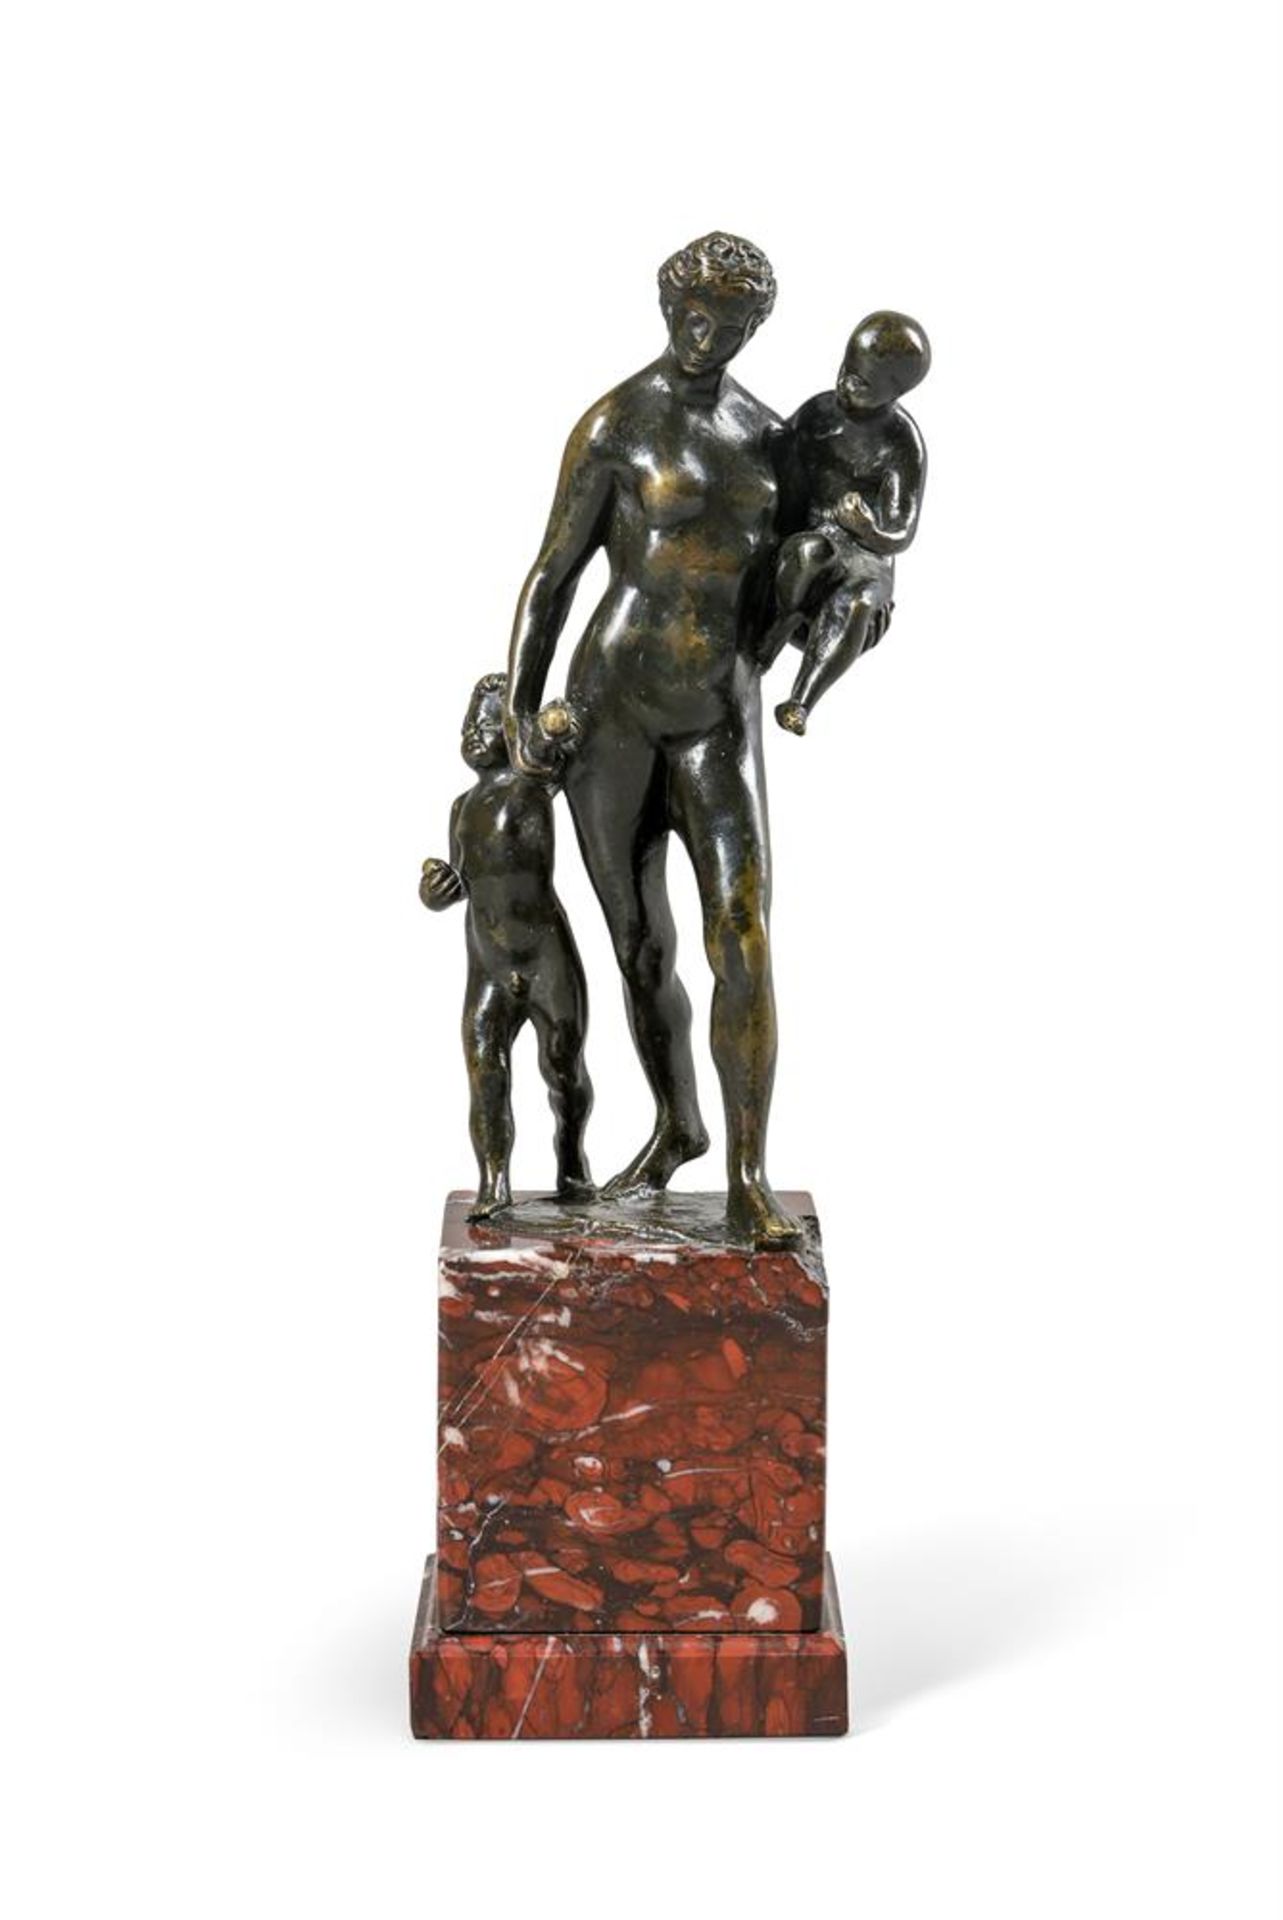 A BRONZE ALLEGORICAL GROUP EMBLEMATIC OF CHARITY, PROBABLY DUTCH, 17TH CENTURY - Image 2 of 4